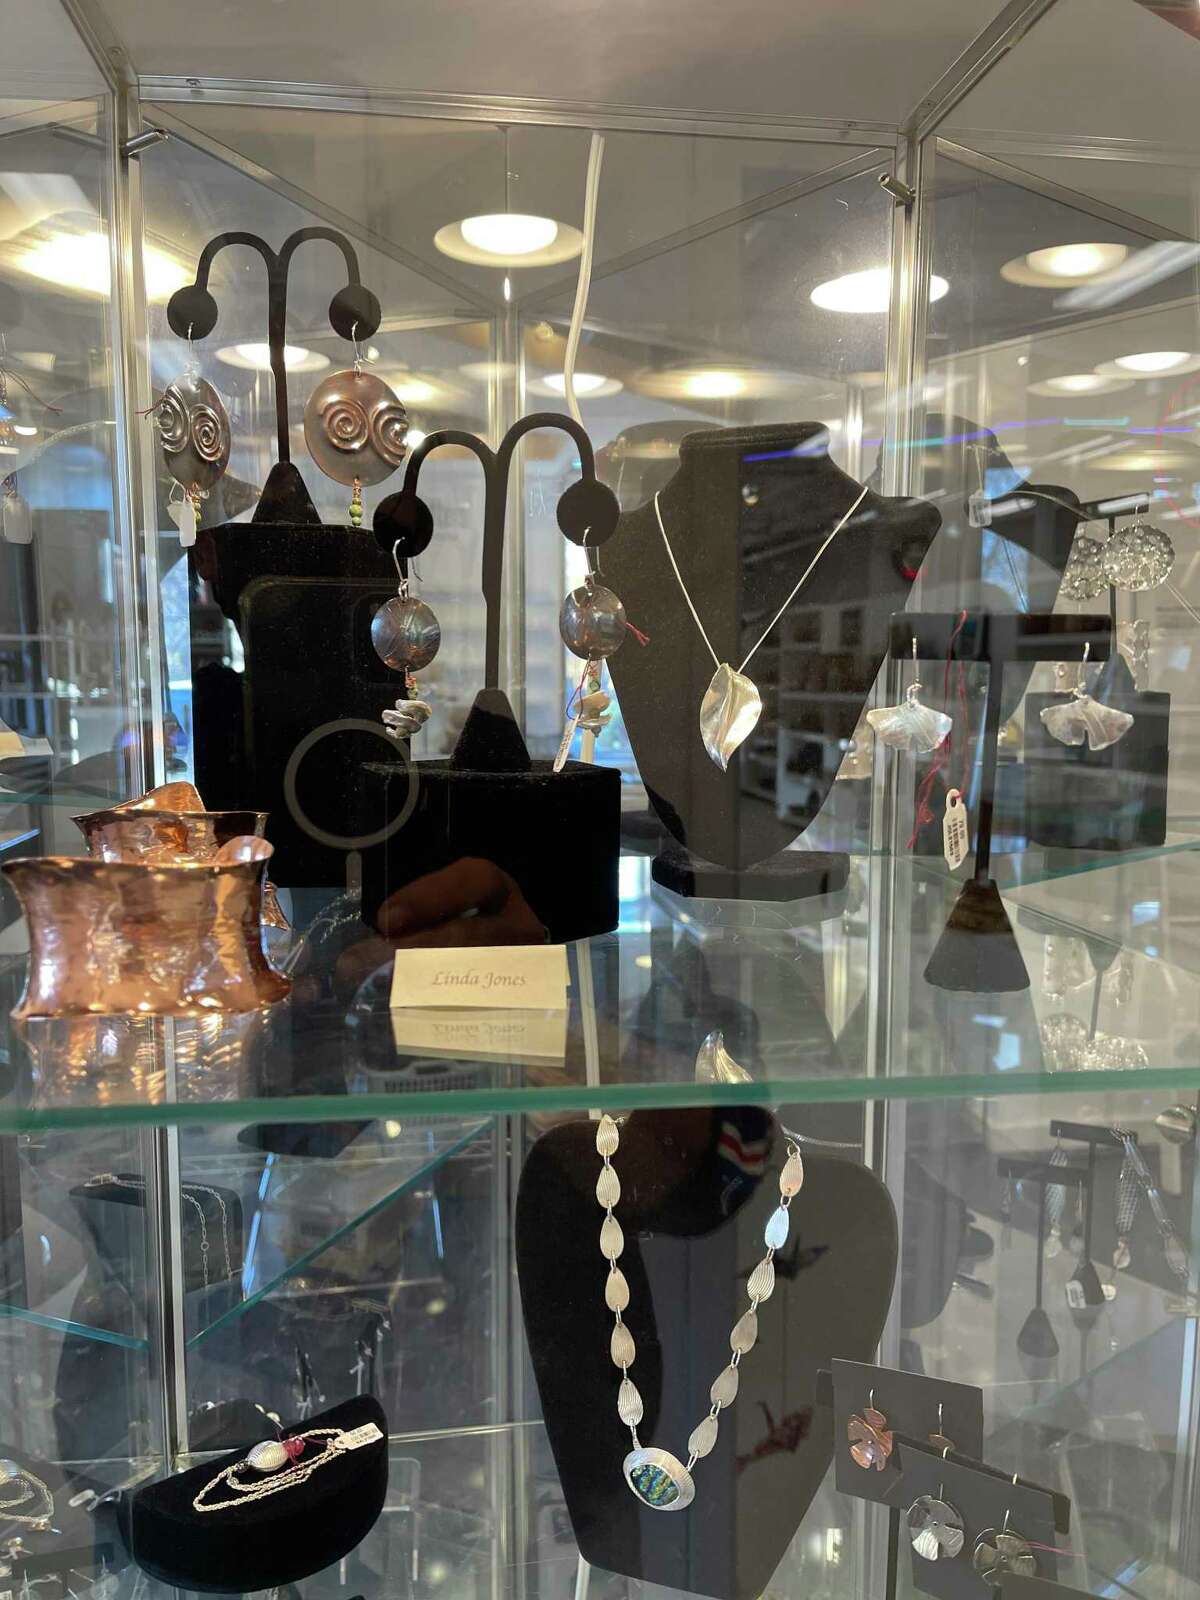 A display of jewelry.